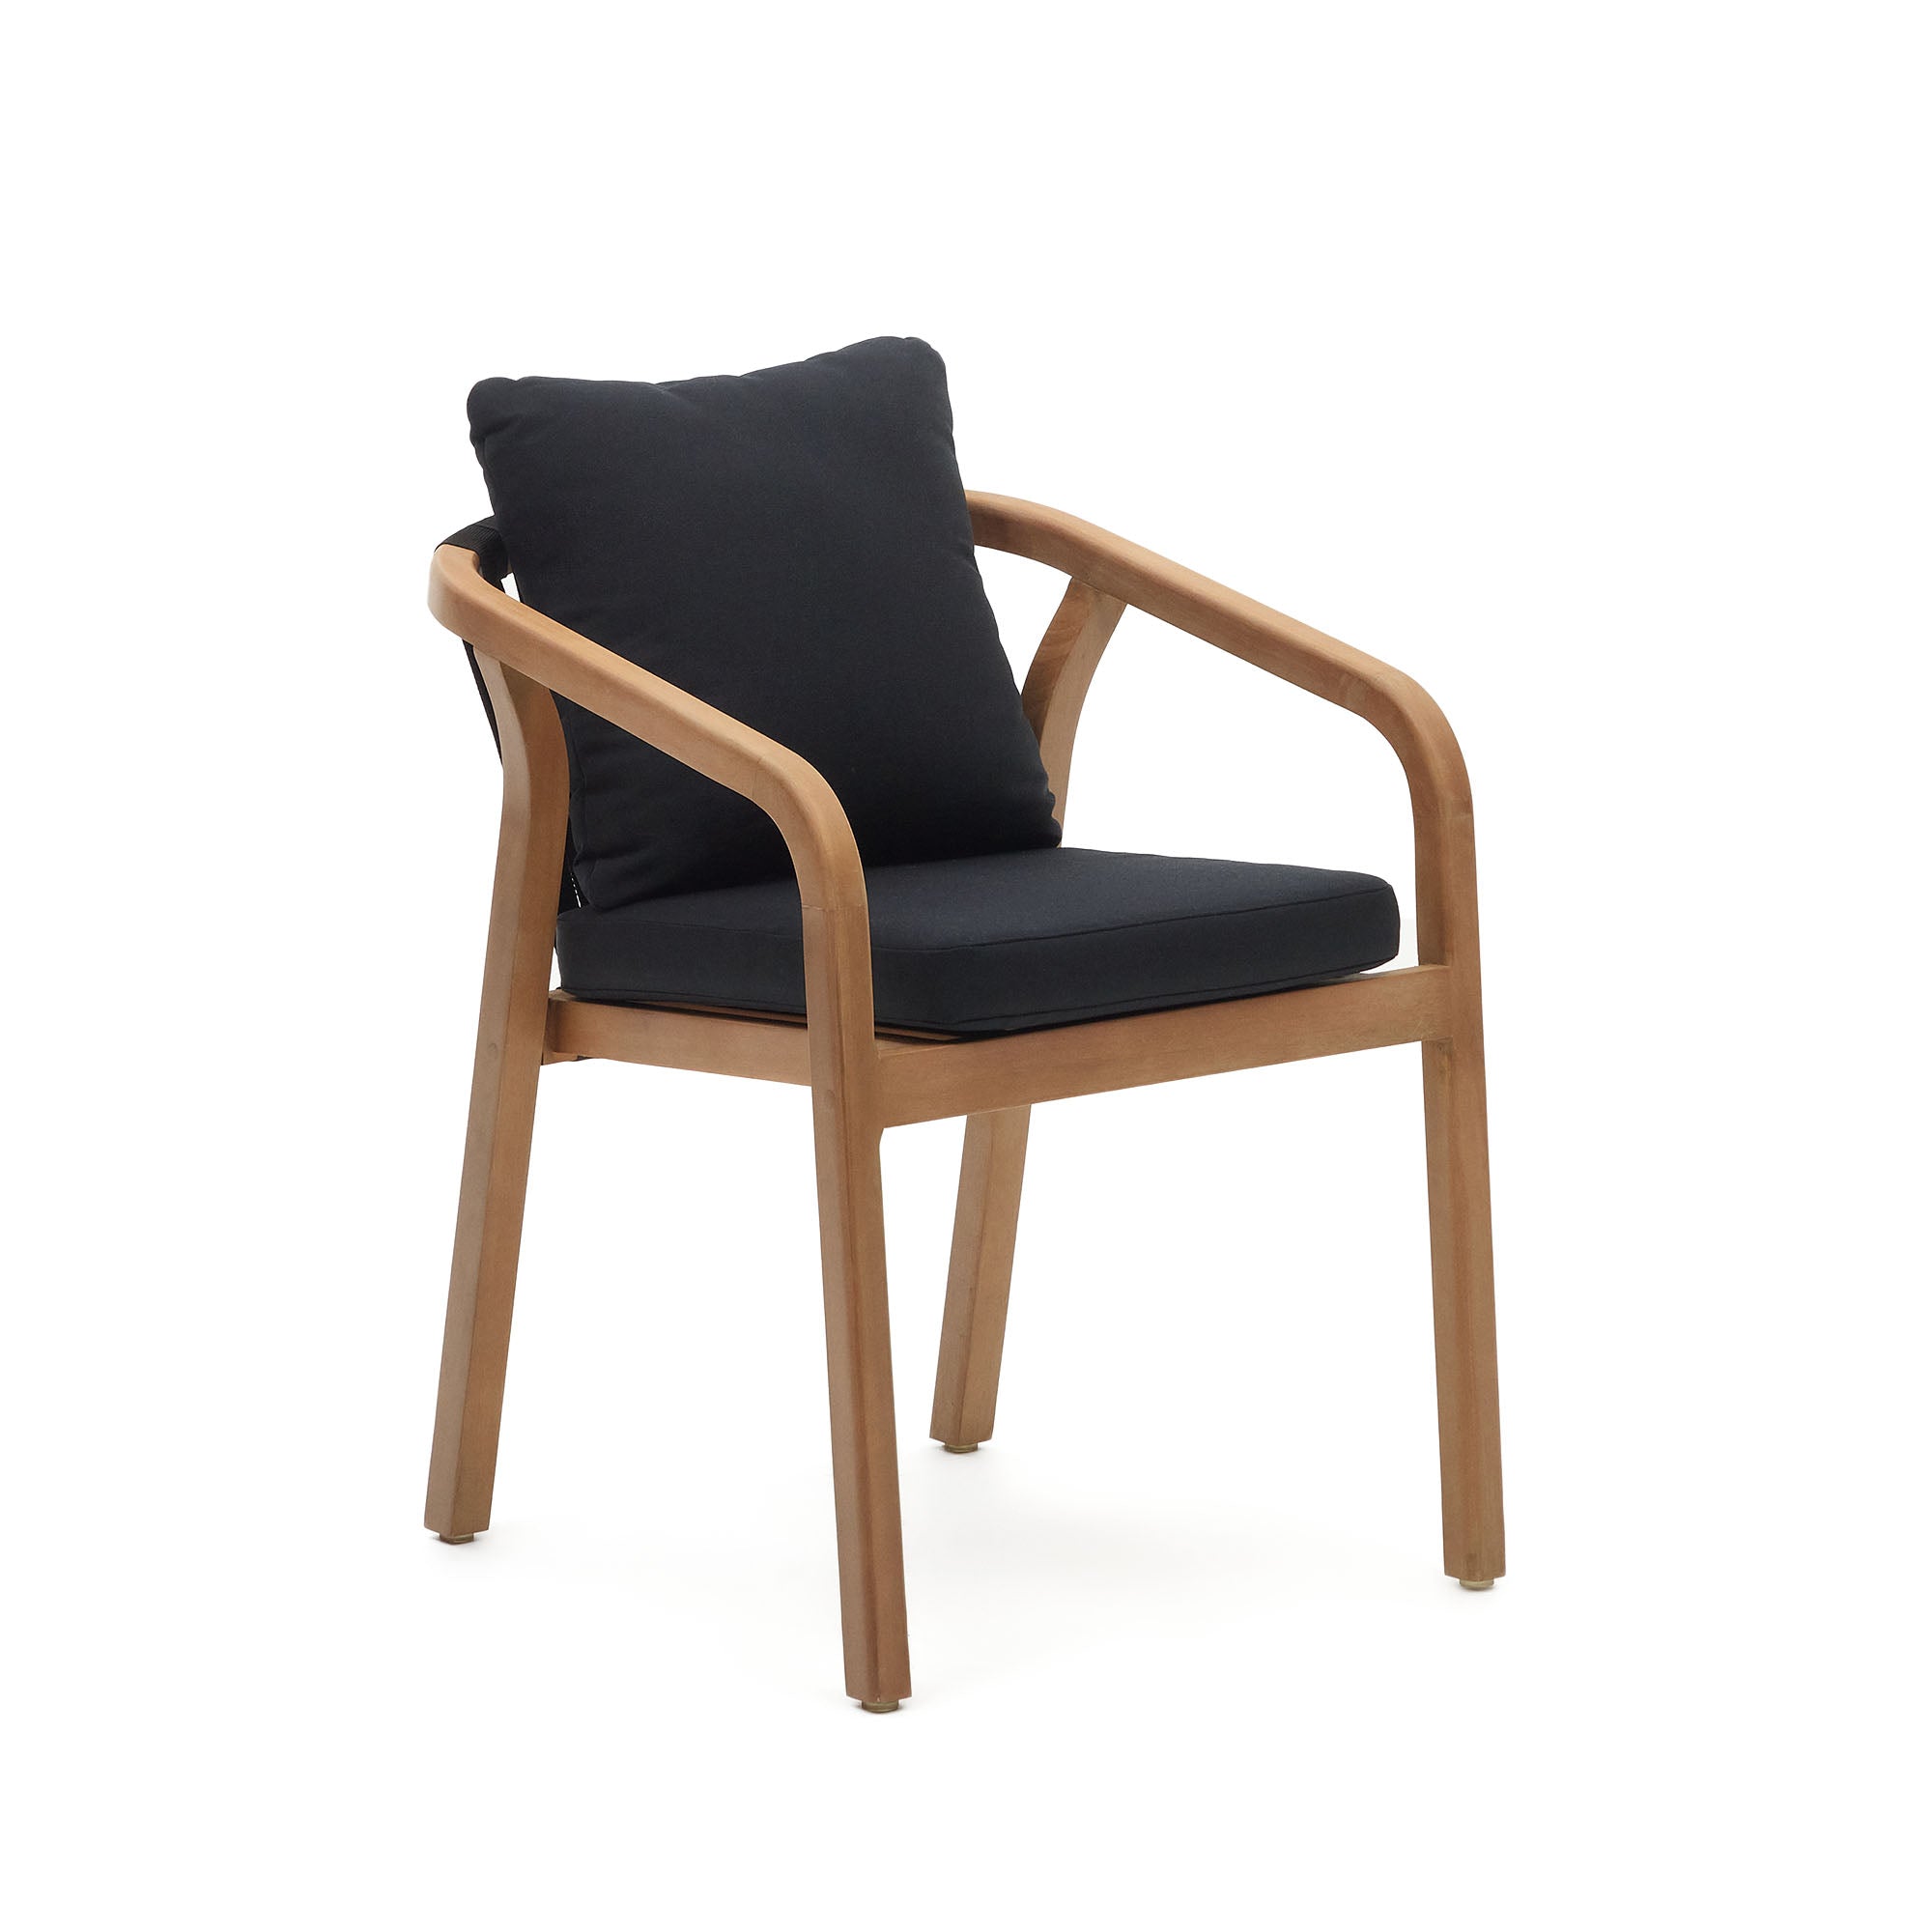 Malaret stackable chair in solid eucalyptus and black cord, FSC